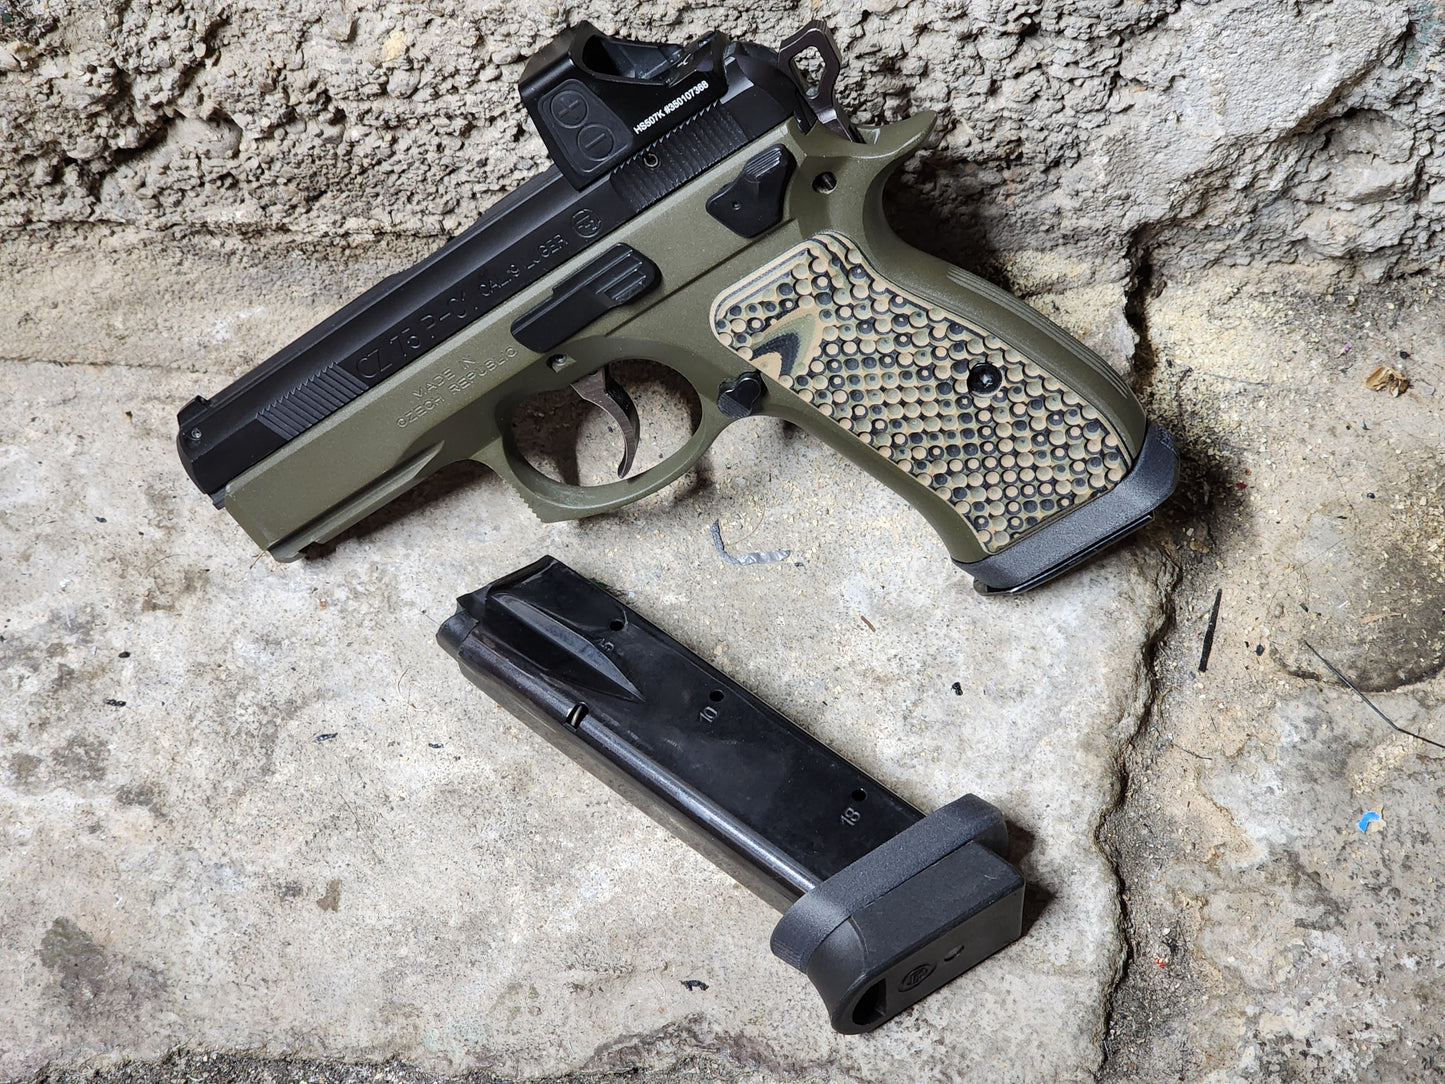 Get ultimate versatility out of your CZ75 compact, PCR, or P01 with the Null adapters